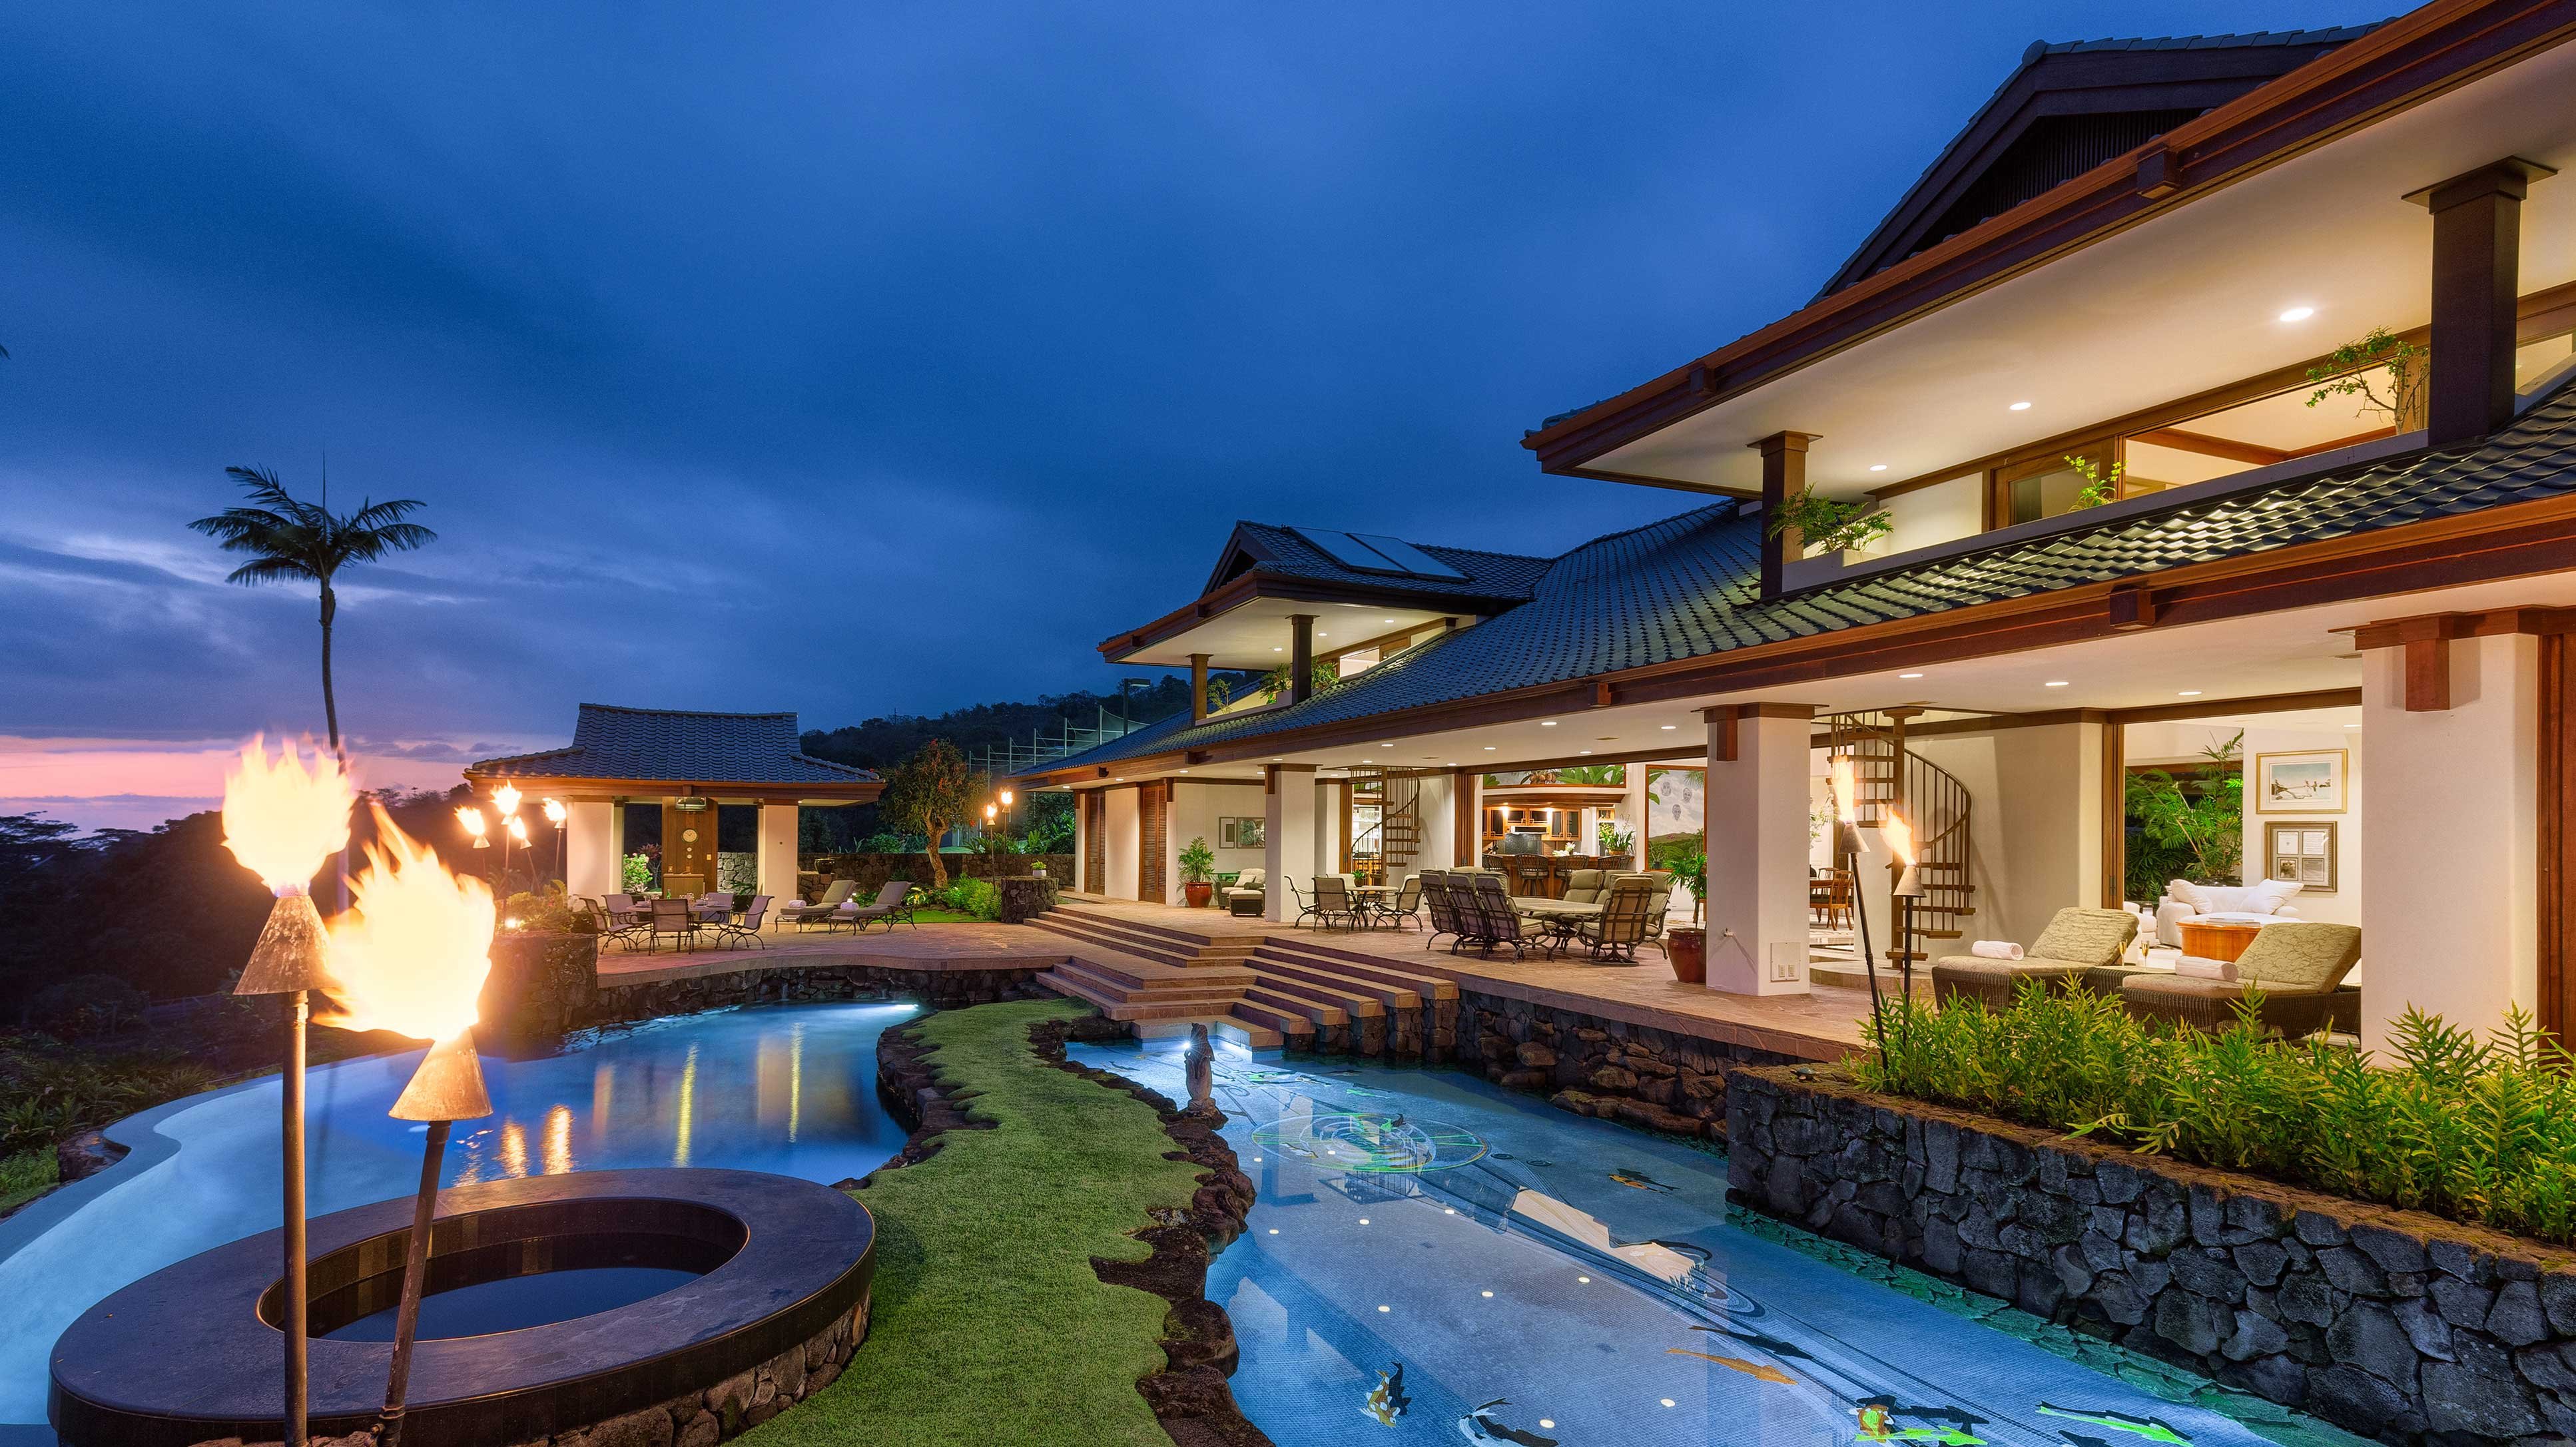 This private estate on Hawaii’s Kona Coast has an alfresco dining terrace surrounded by Japanese-inspired botanical gardens with a koi pond, waterfalls, and exotic fruit and nut trees.